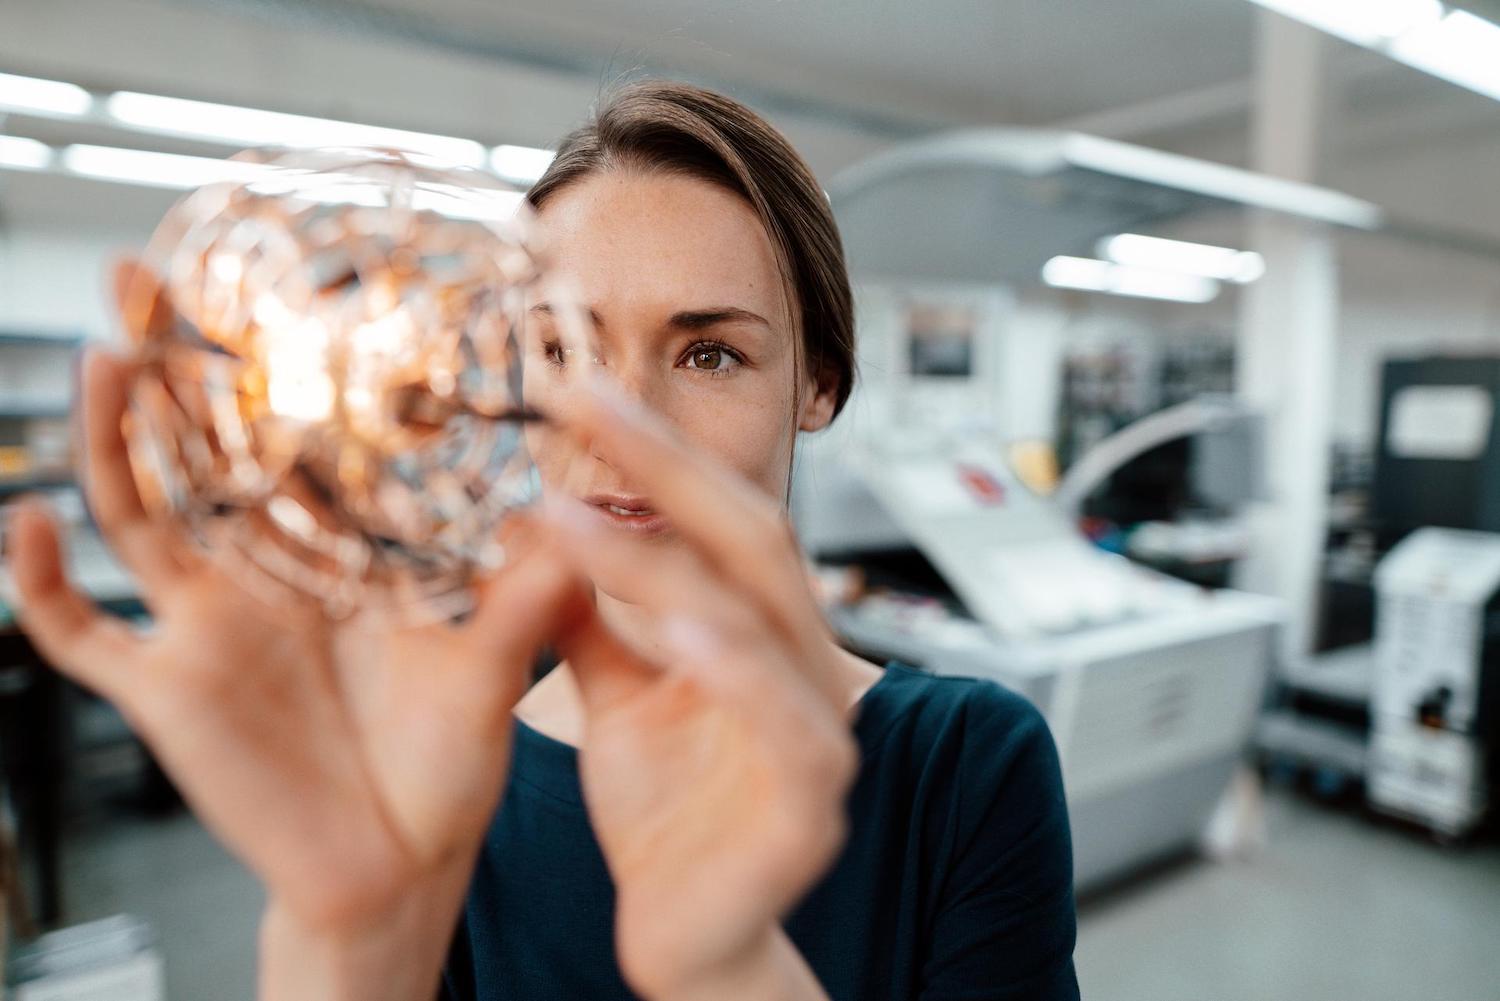 Woman looking into a round glass shape with lights in it